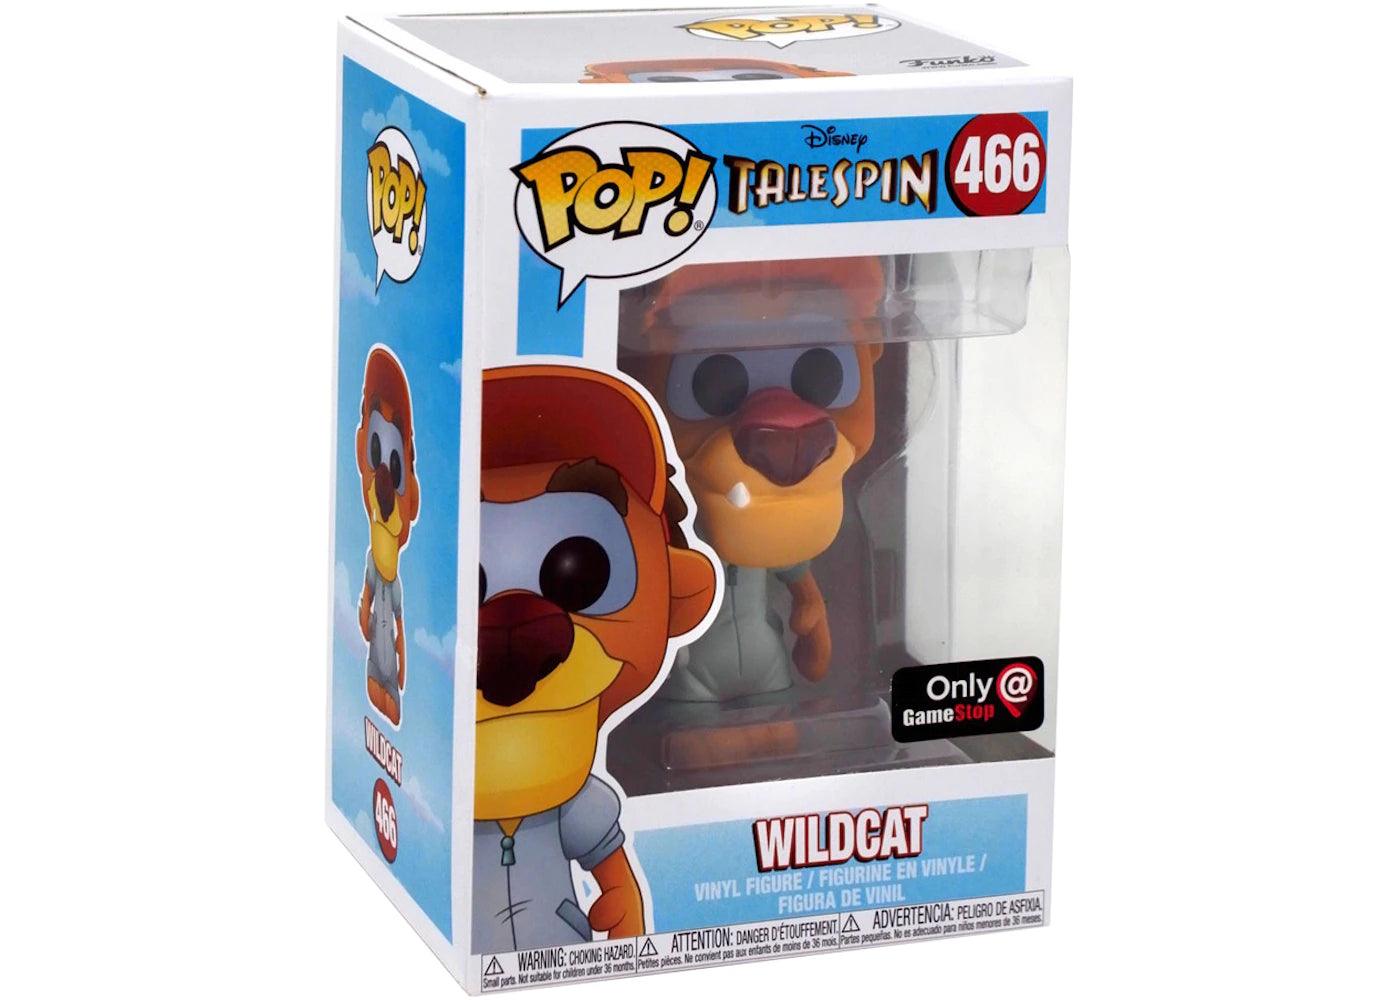 Pop! Disney - Talespin - Wildcat - #466 - EB Games EXCLUSIVE - Hobby Champion Inc